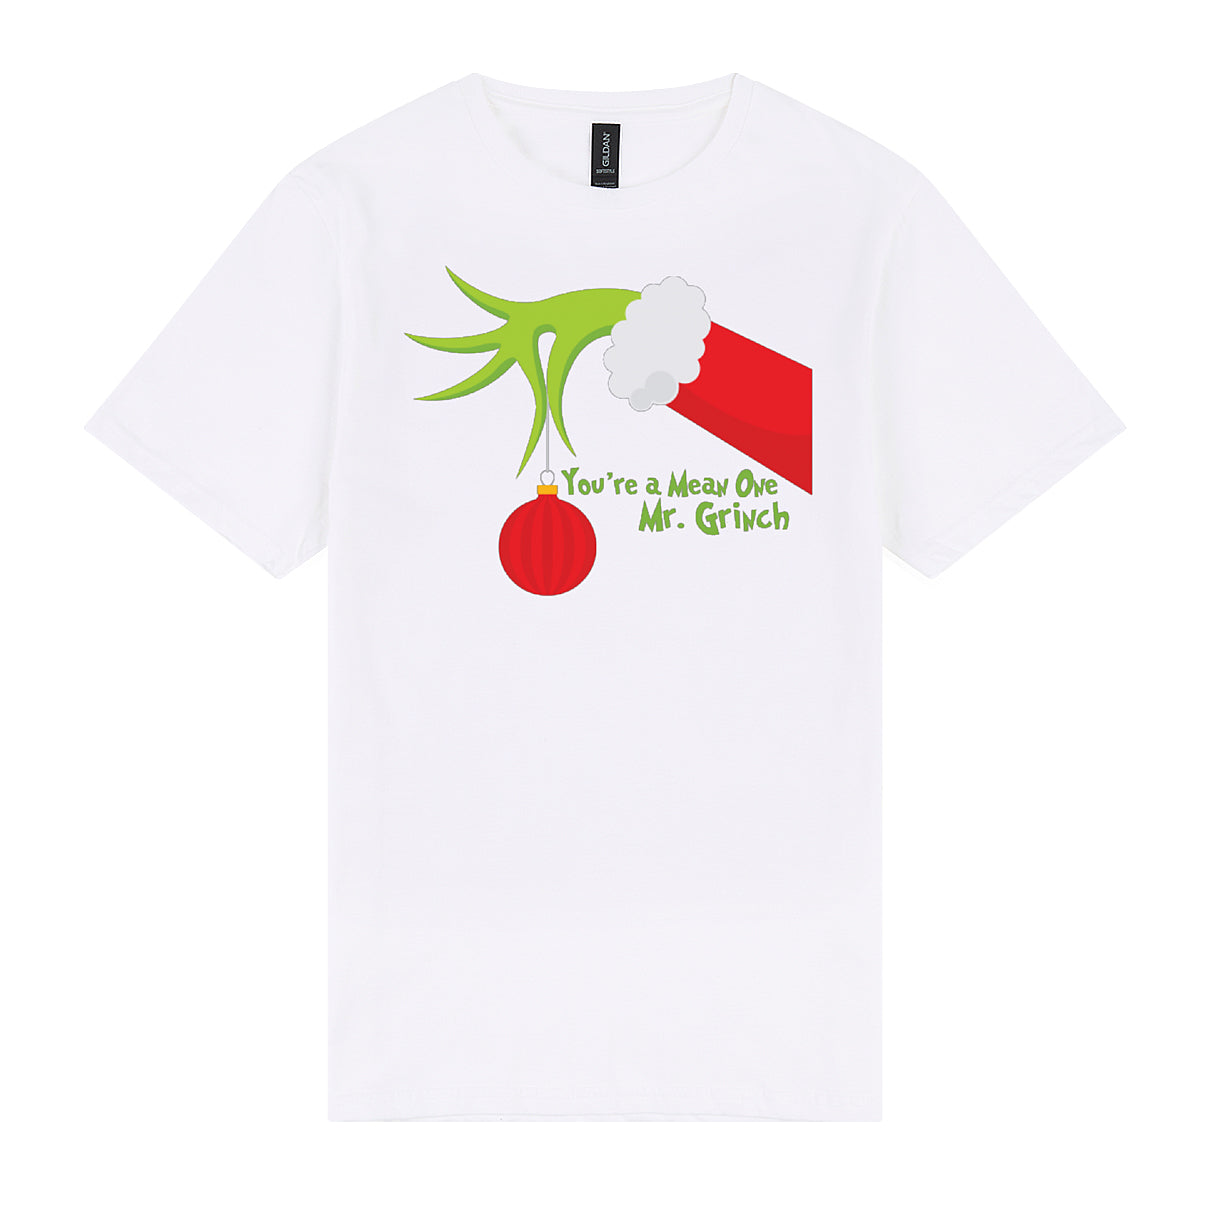 Mr. Grinch Softstyle Tee